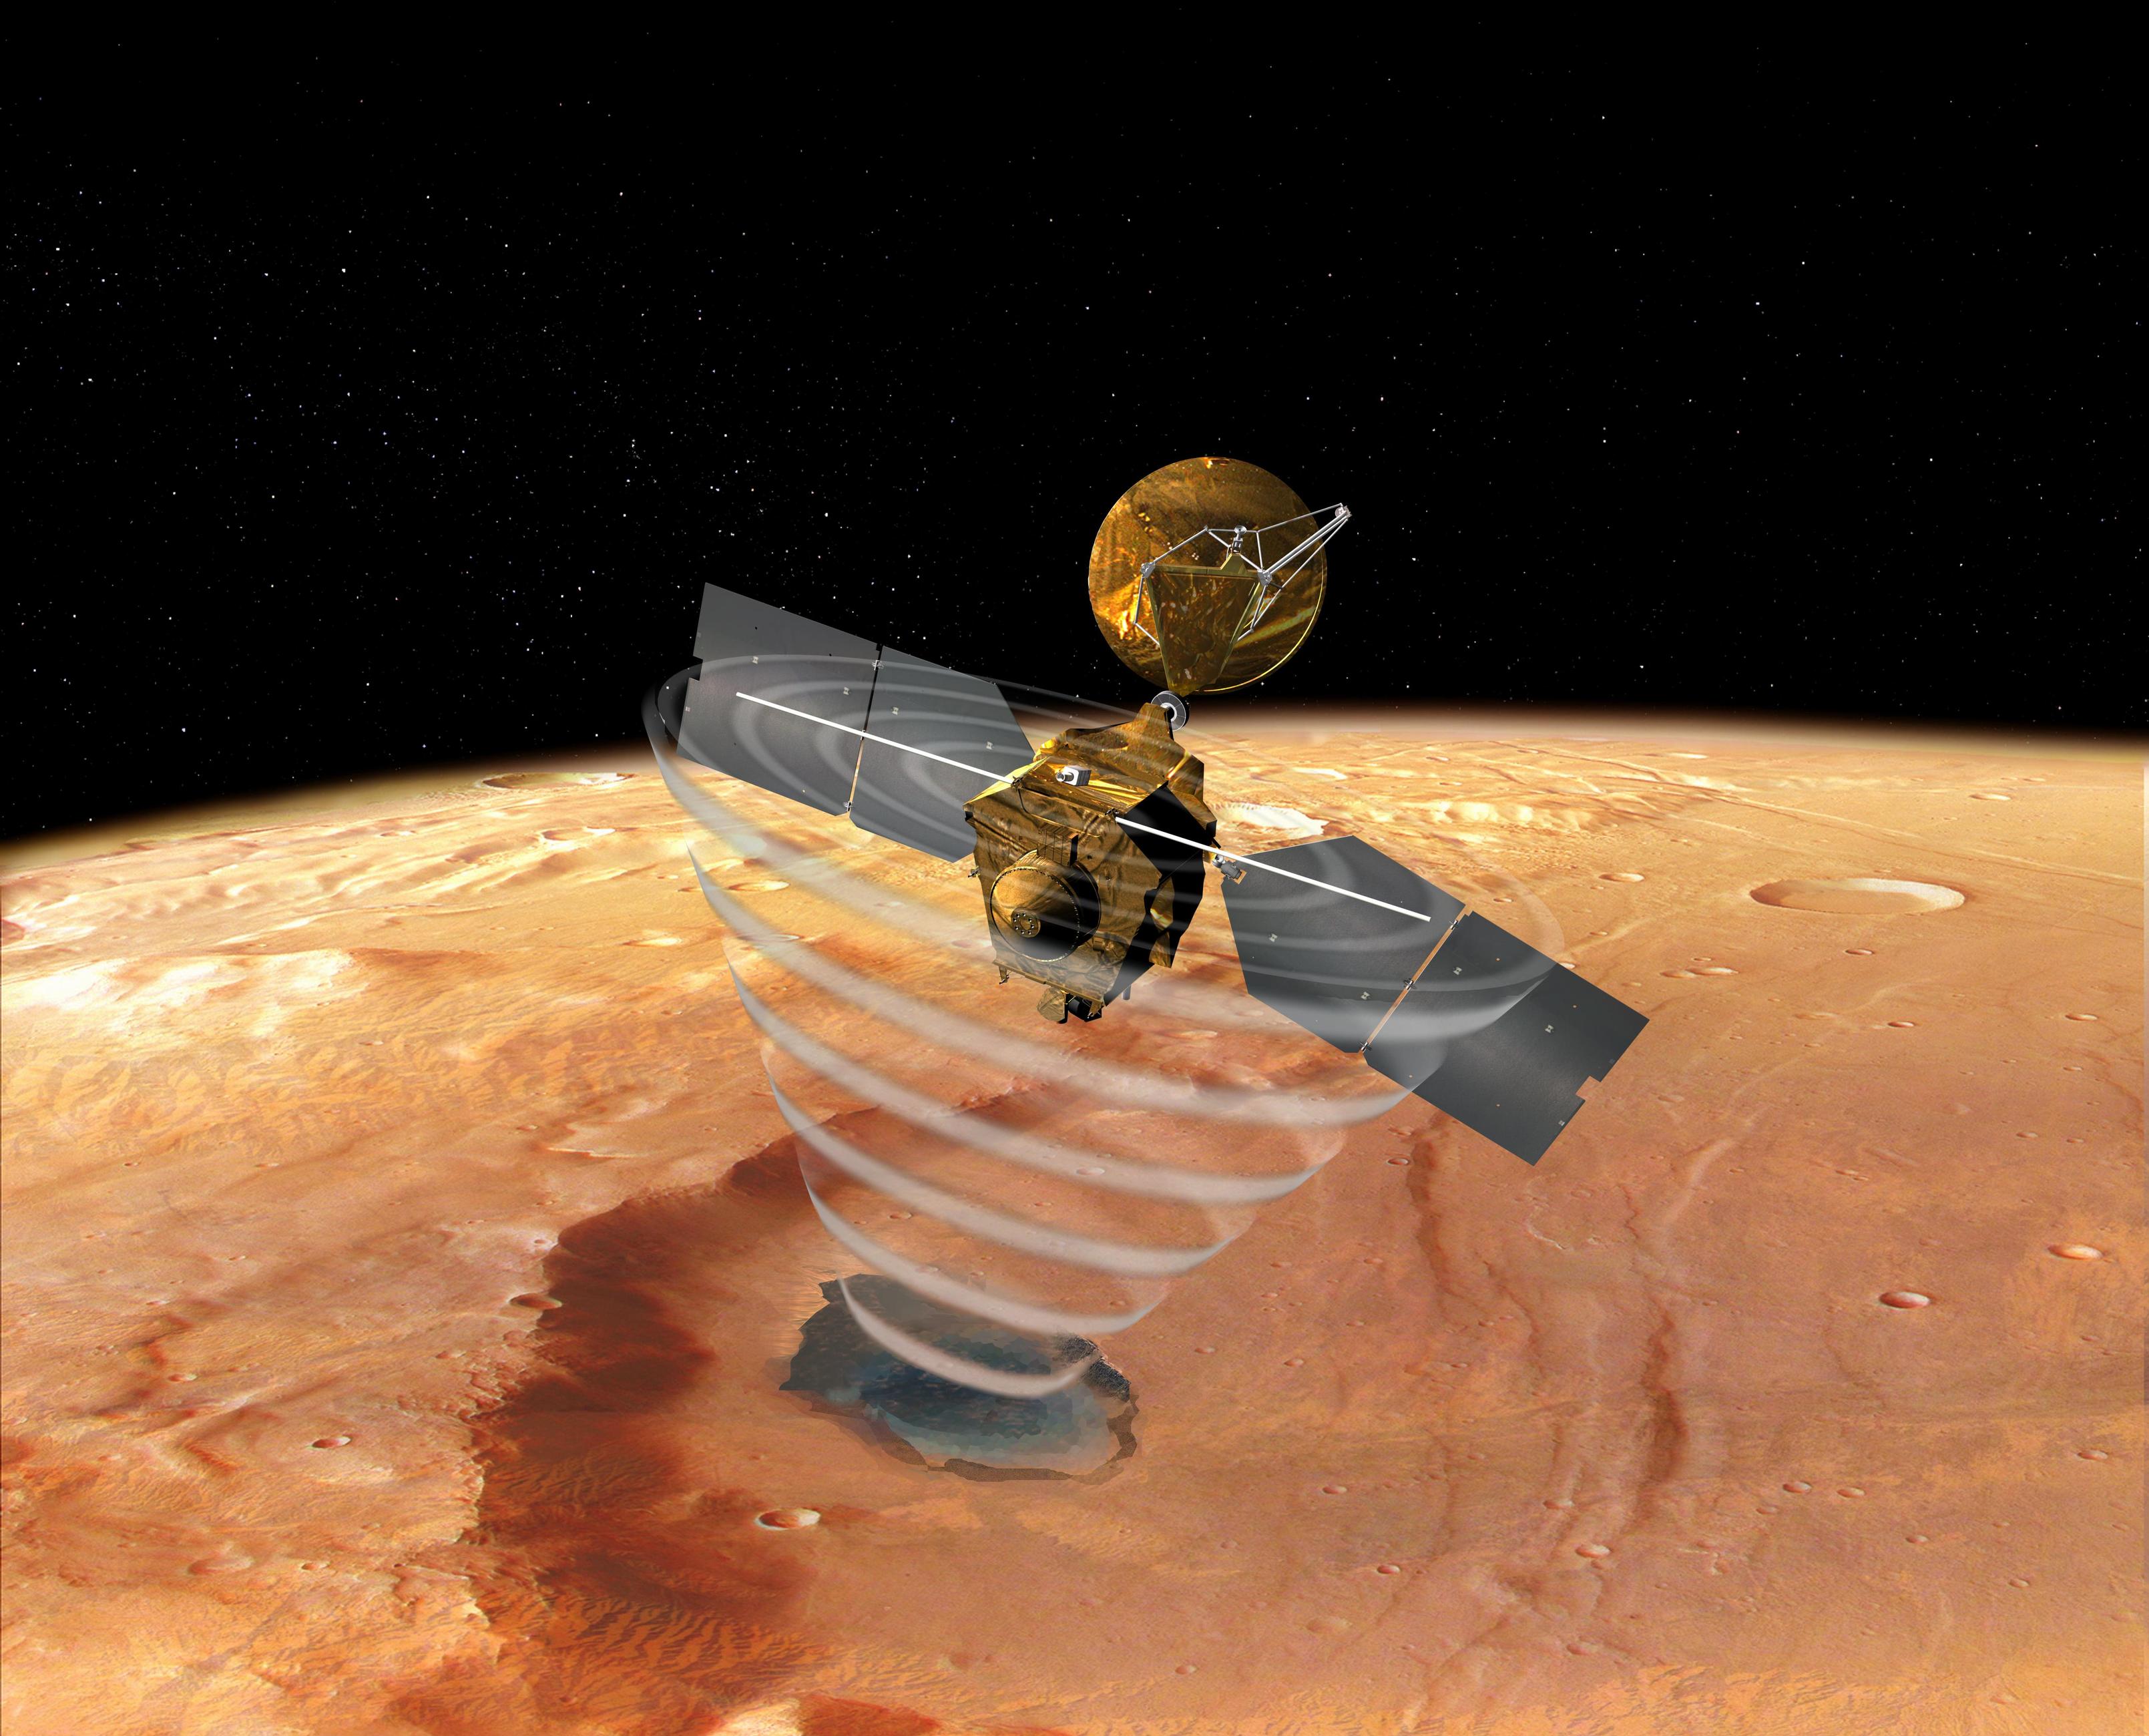 This image is an artist's concept of a view looking down on NASA's Mars Reconnaissance Orbiter. The spacecraft is pictured using its Shallow Subsurface Radar instrument (SHARAD) to "look" under the surface of Mars.